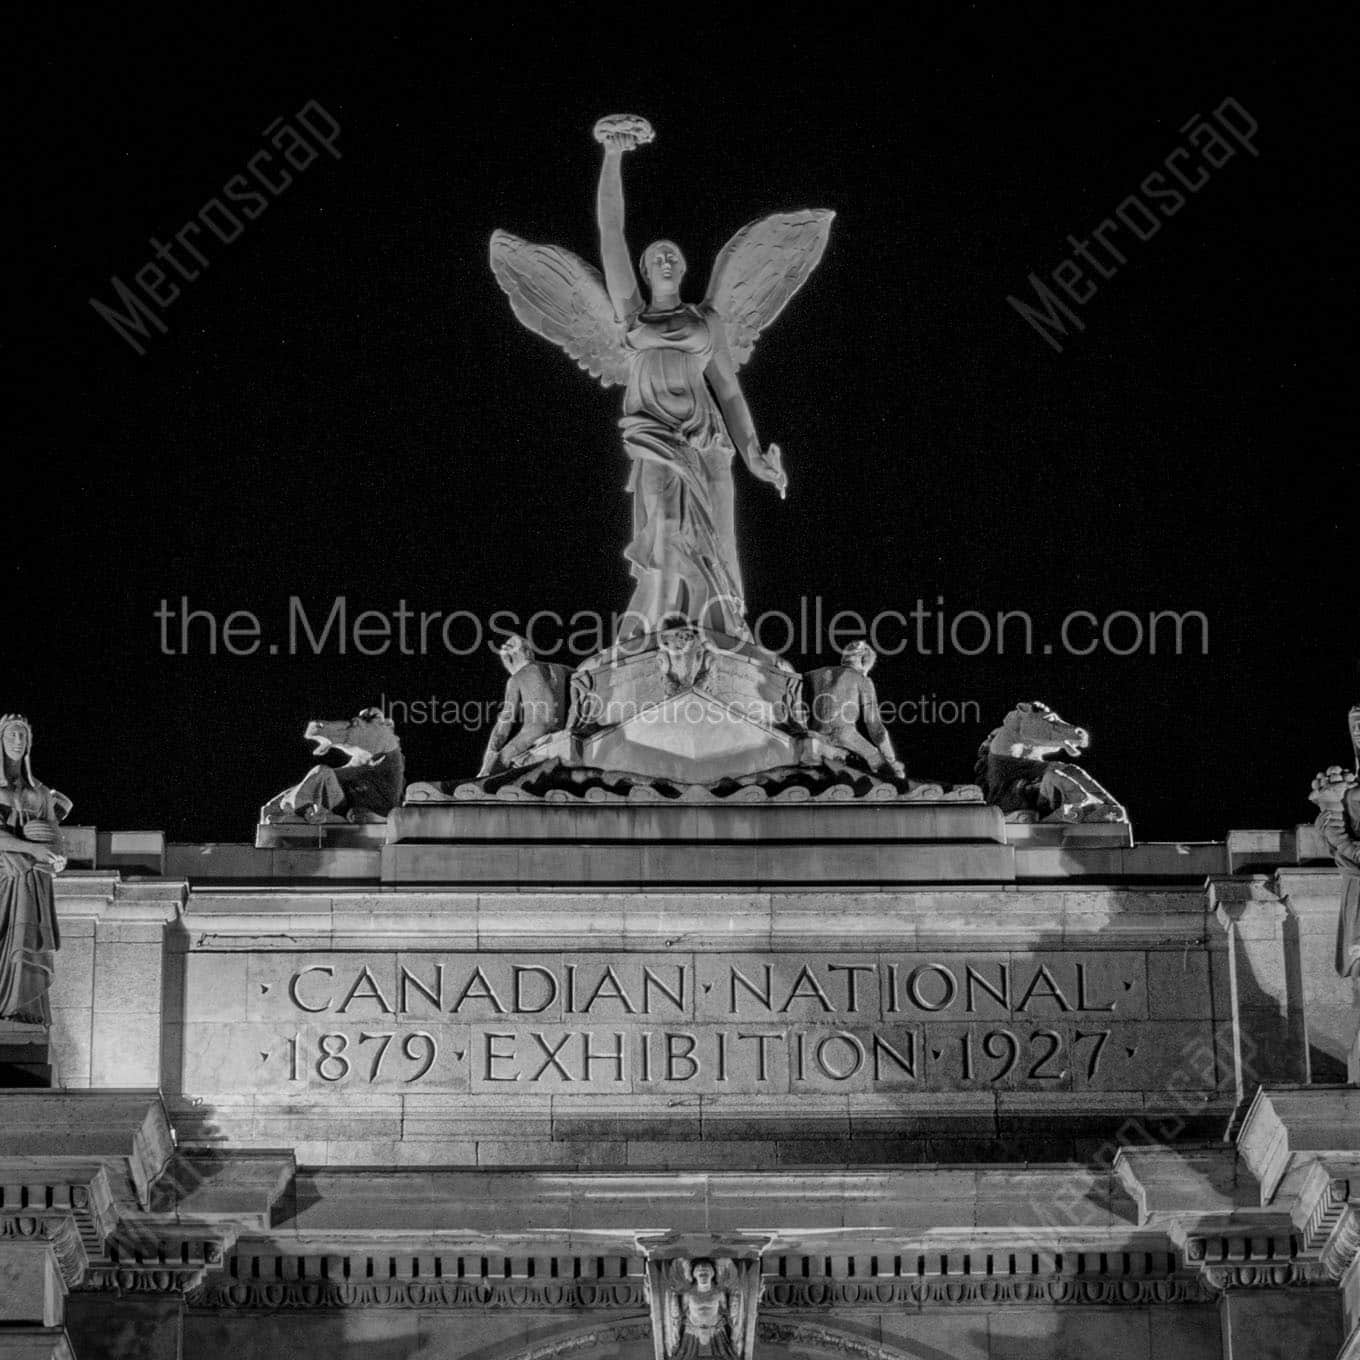 canadian national exhibition at night Black & White Wall Art